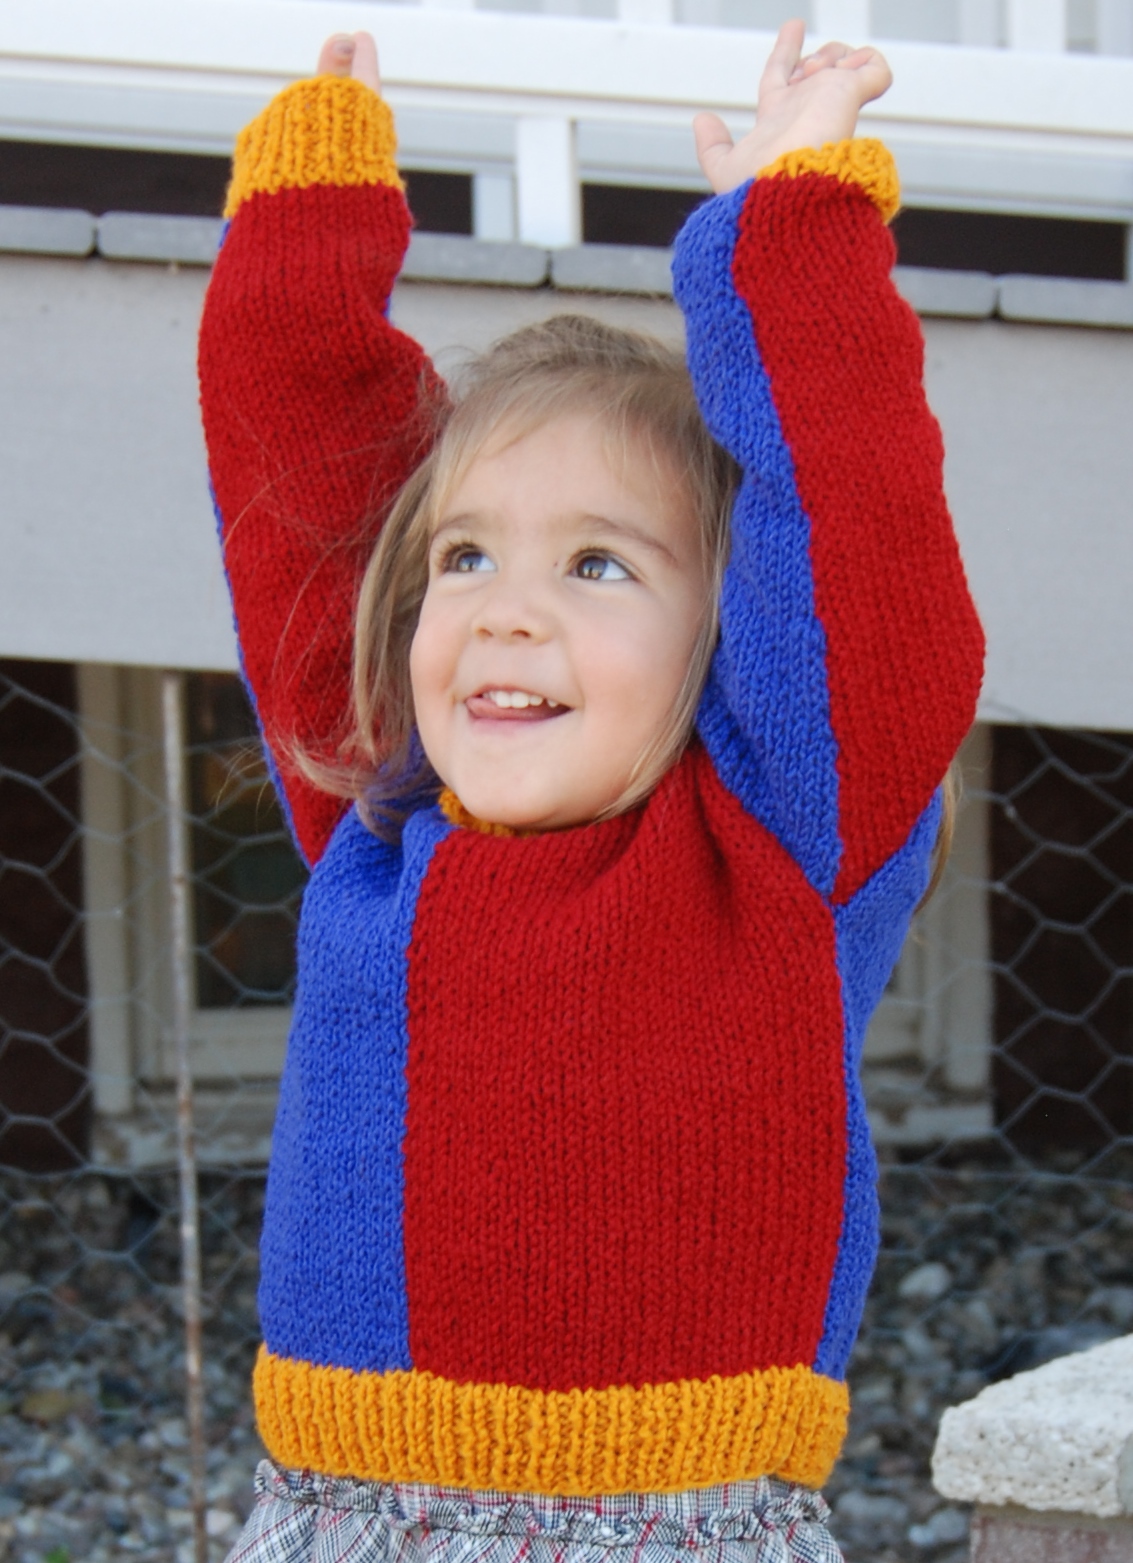 A child with raised arms wears a hand knit colorblock pullover in red, gold, and blue